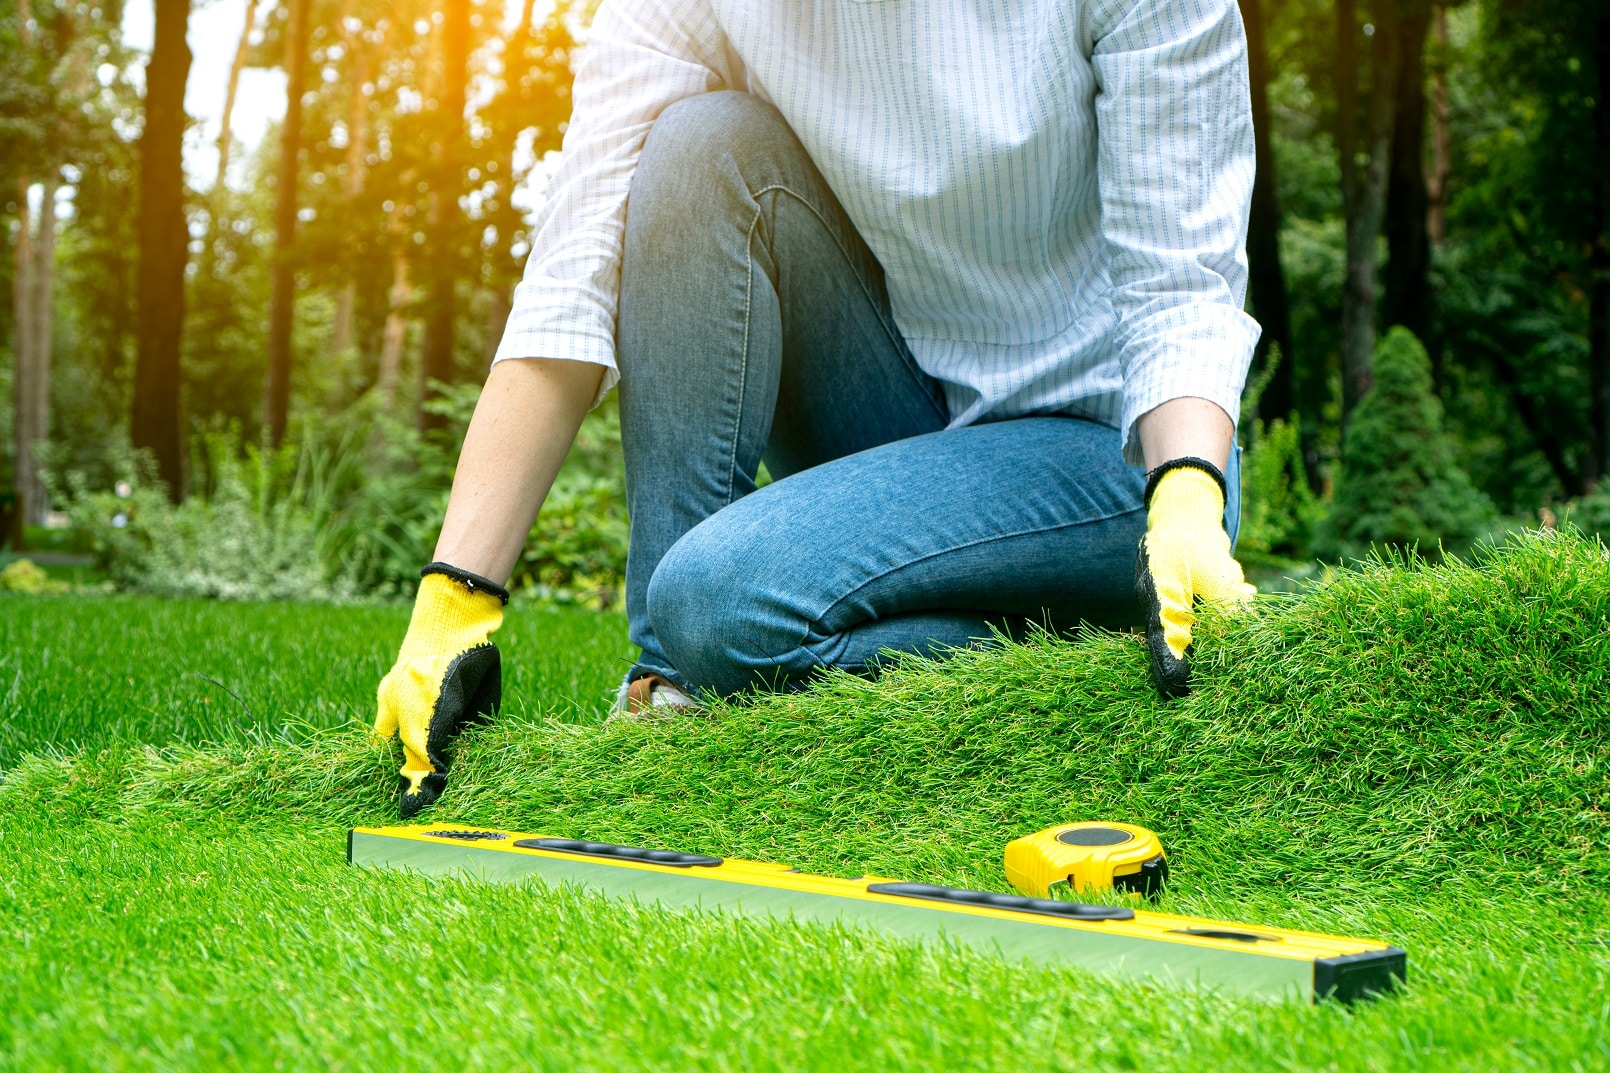 How to Calculate Artificial Turf Requirements for Your Yard